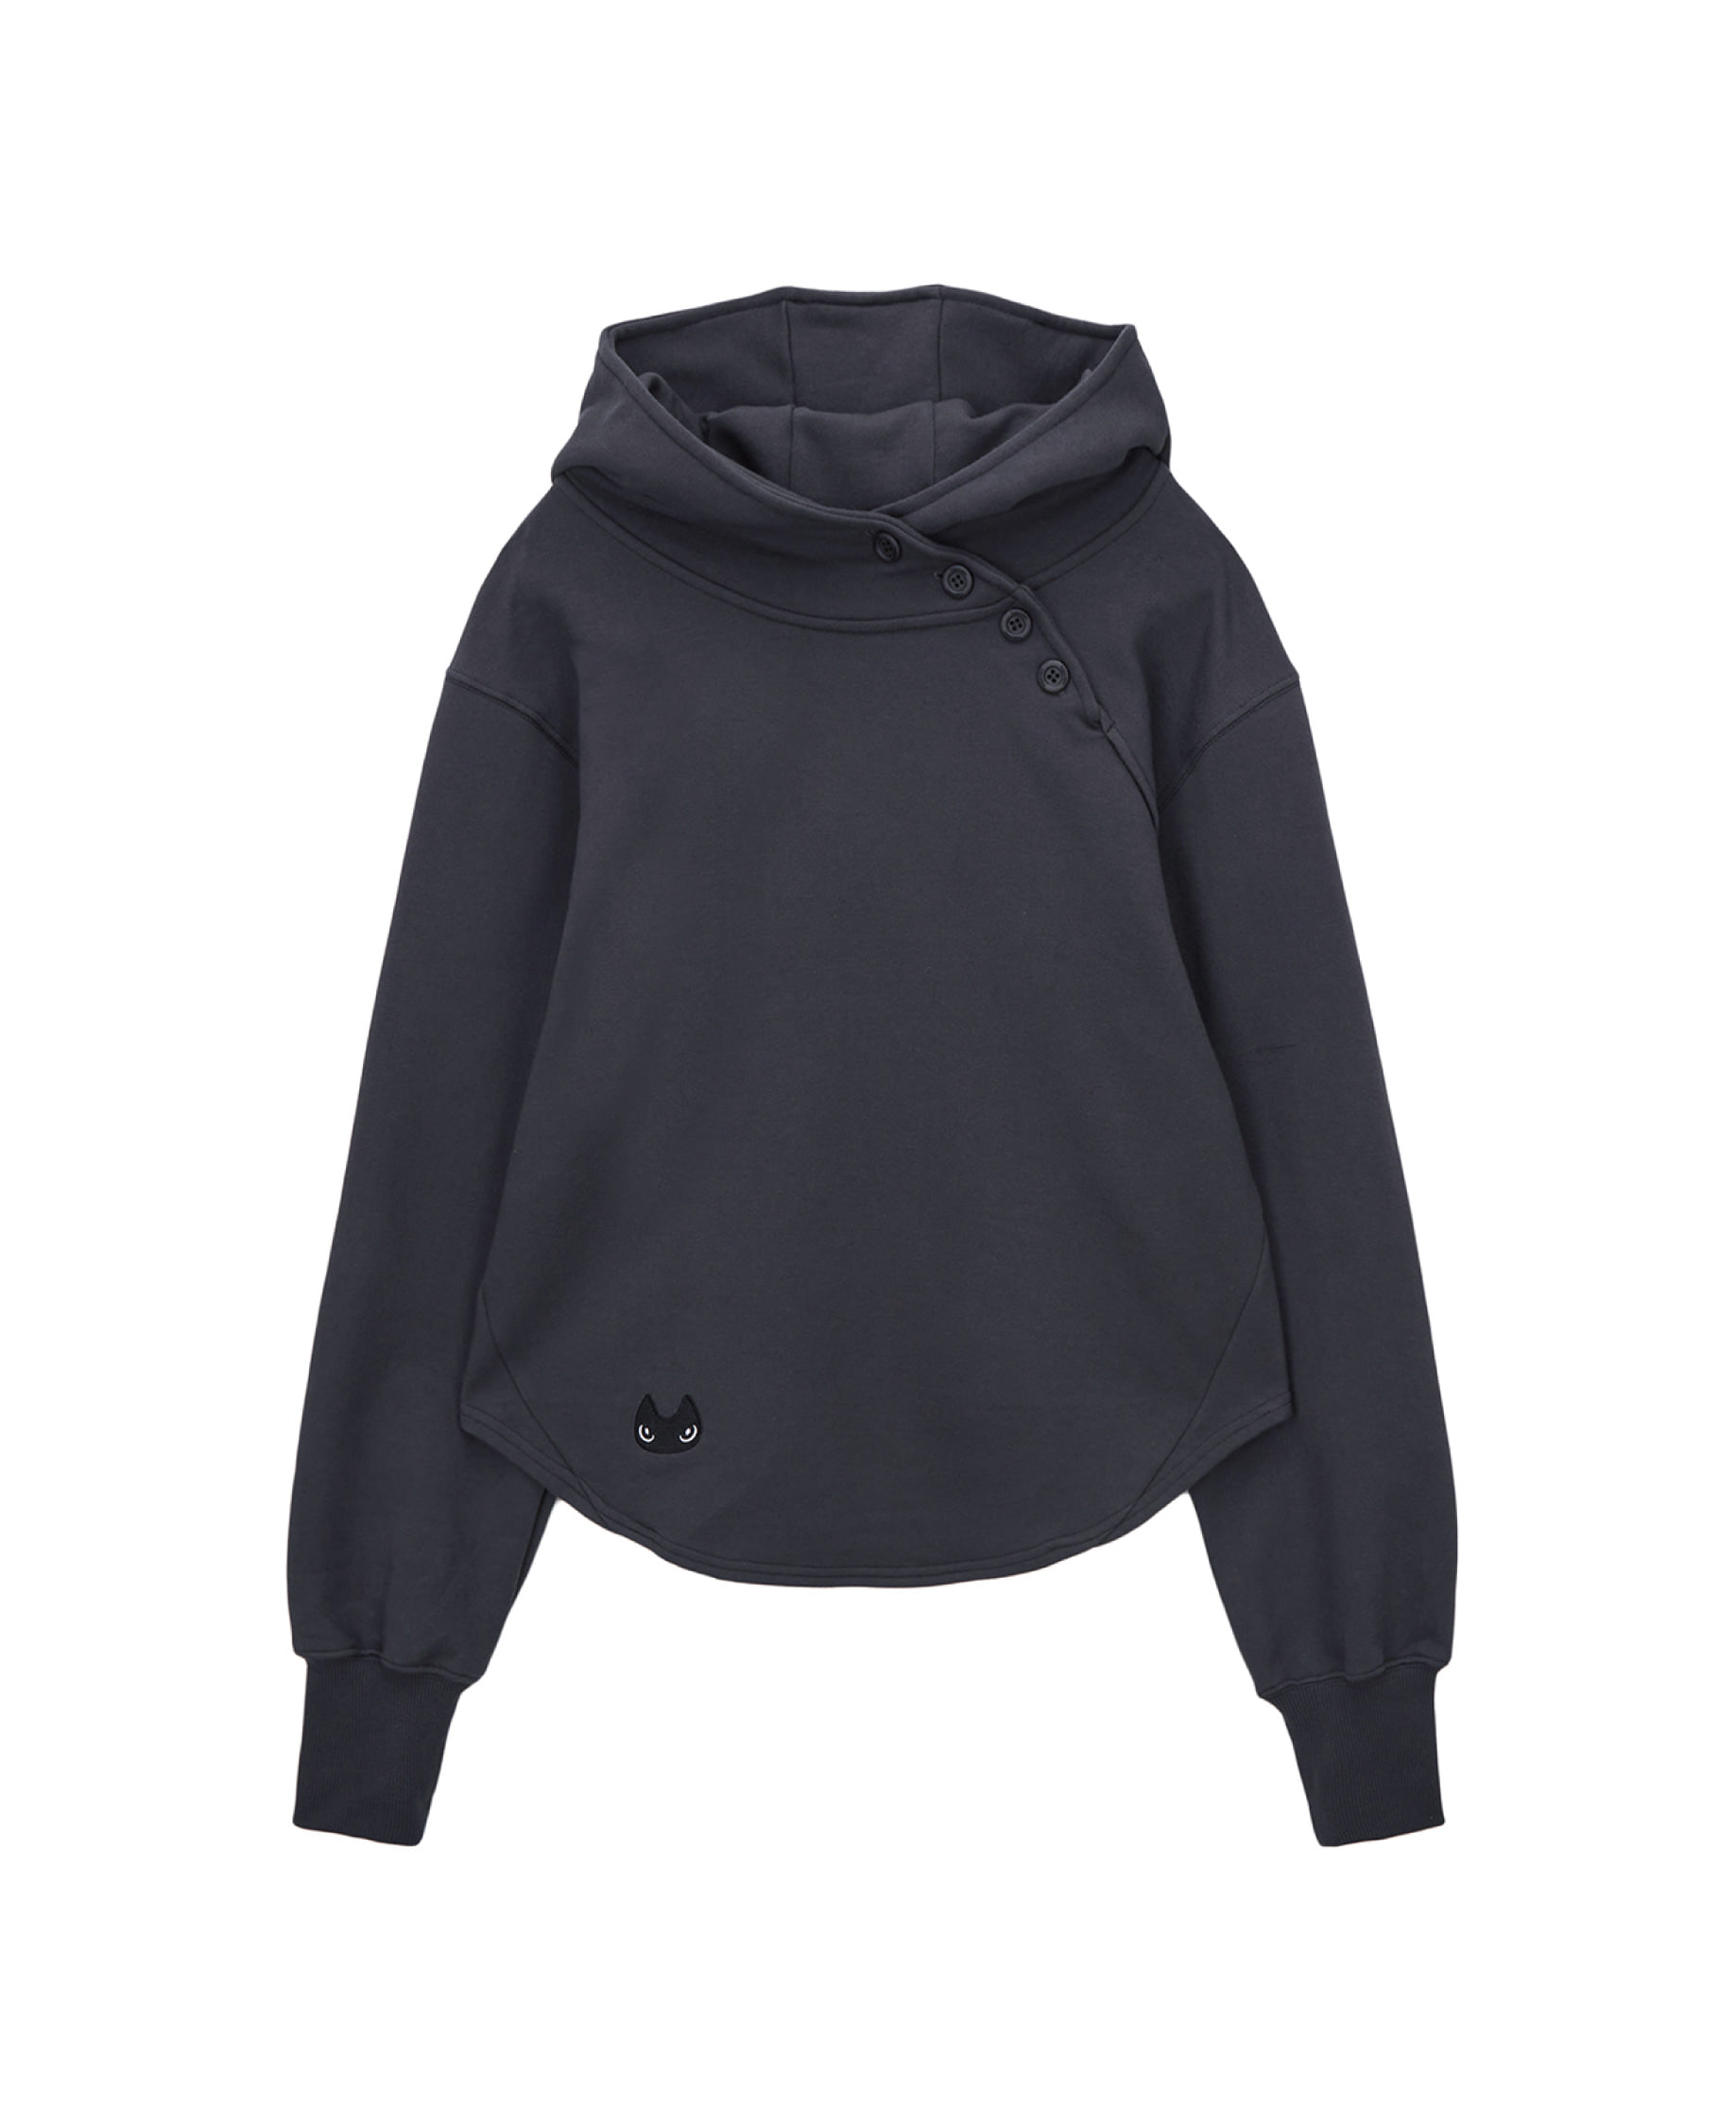 Hugging Button-up hoodie (charcoal)